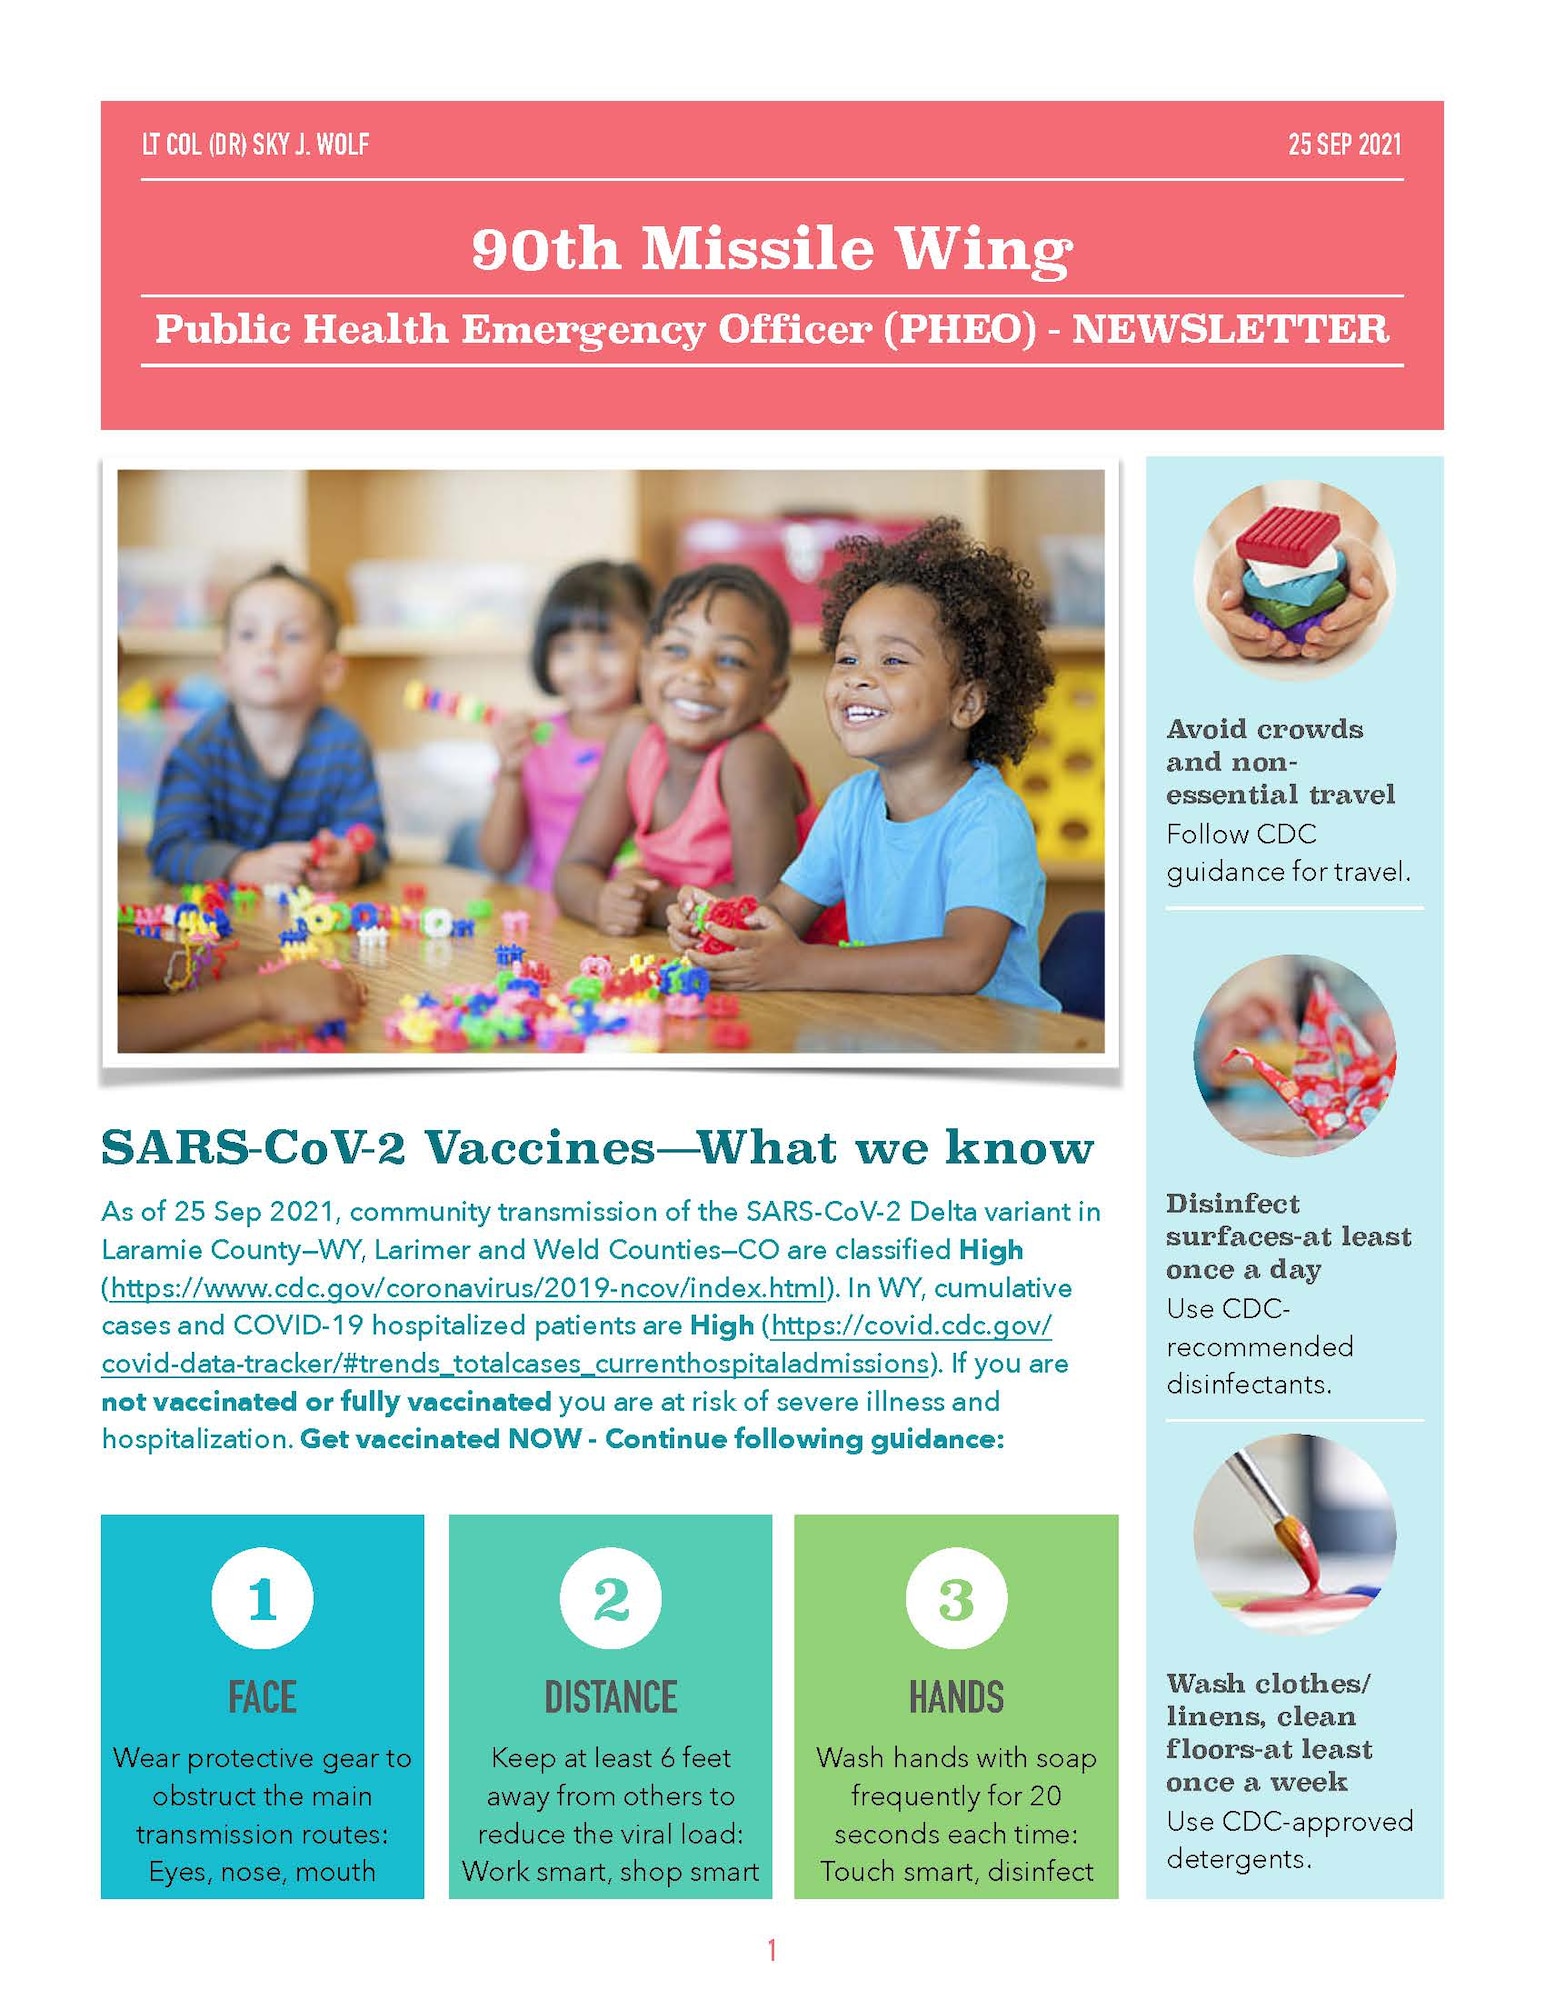 The 90th Missile Wing Public Health Emergency Officer explains the data behind SARS-CoV-2 and being vaccinated.  With the Delta variant spreading, it's vital that people are taking the proper safety precautions. (U.S. Air Force graphic by Lt. Col. Sky Wolf.)